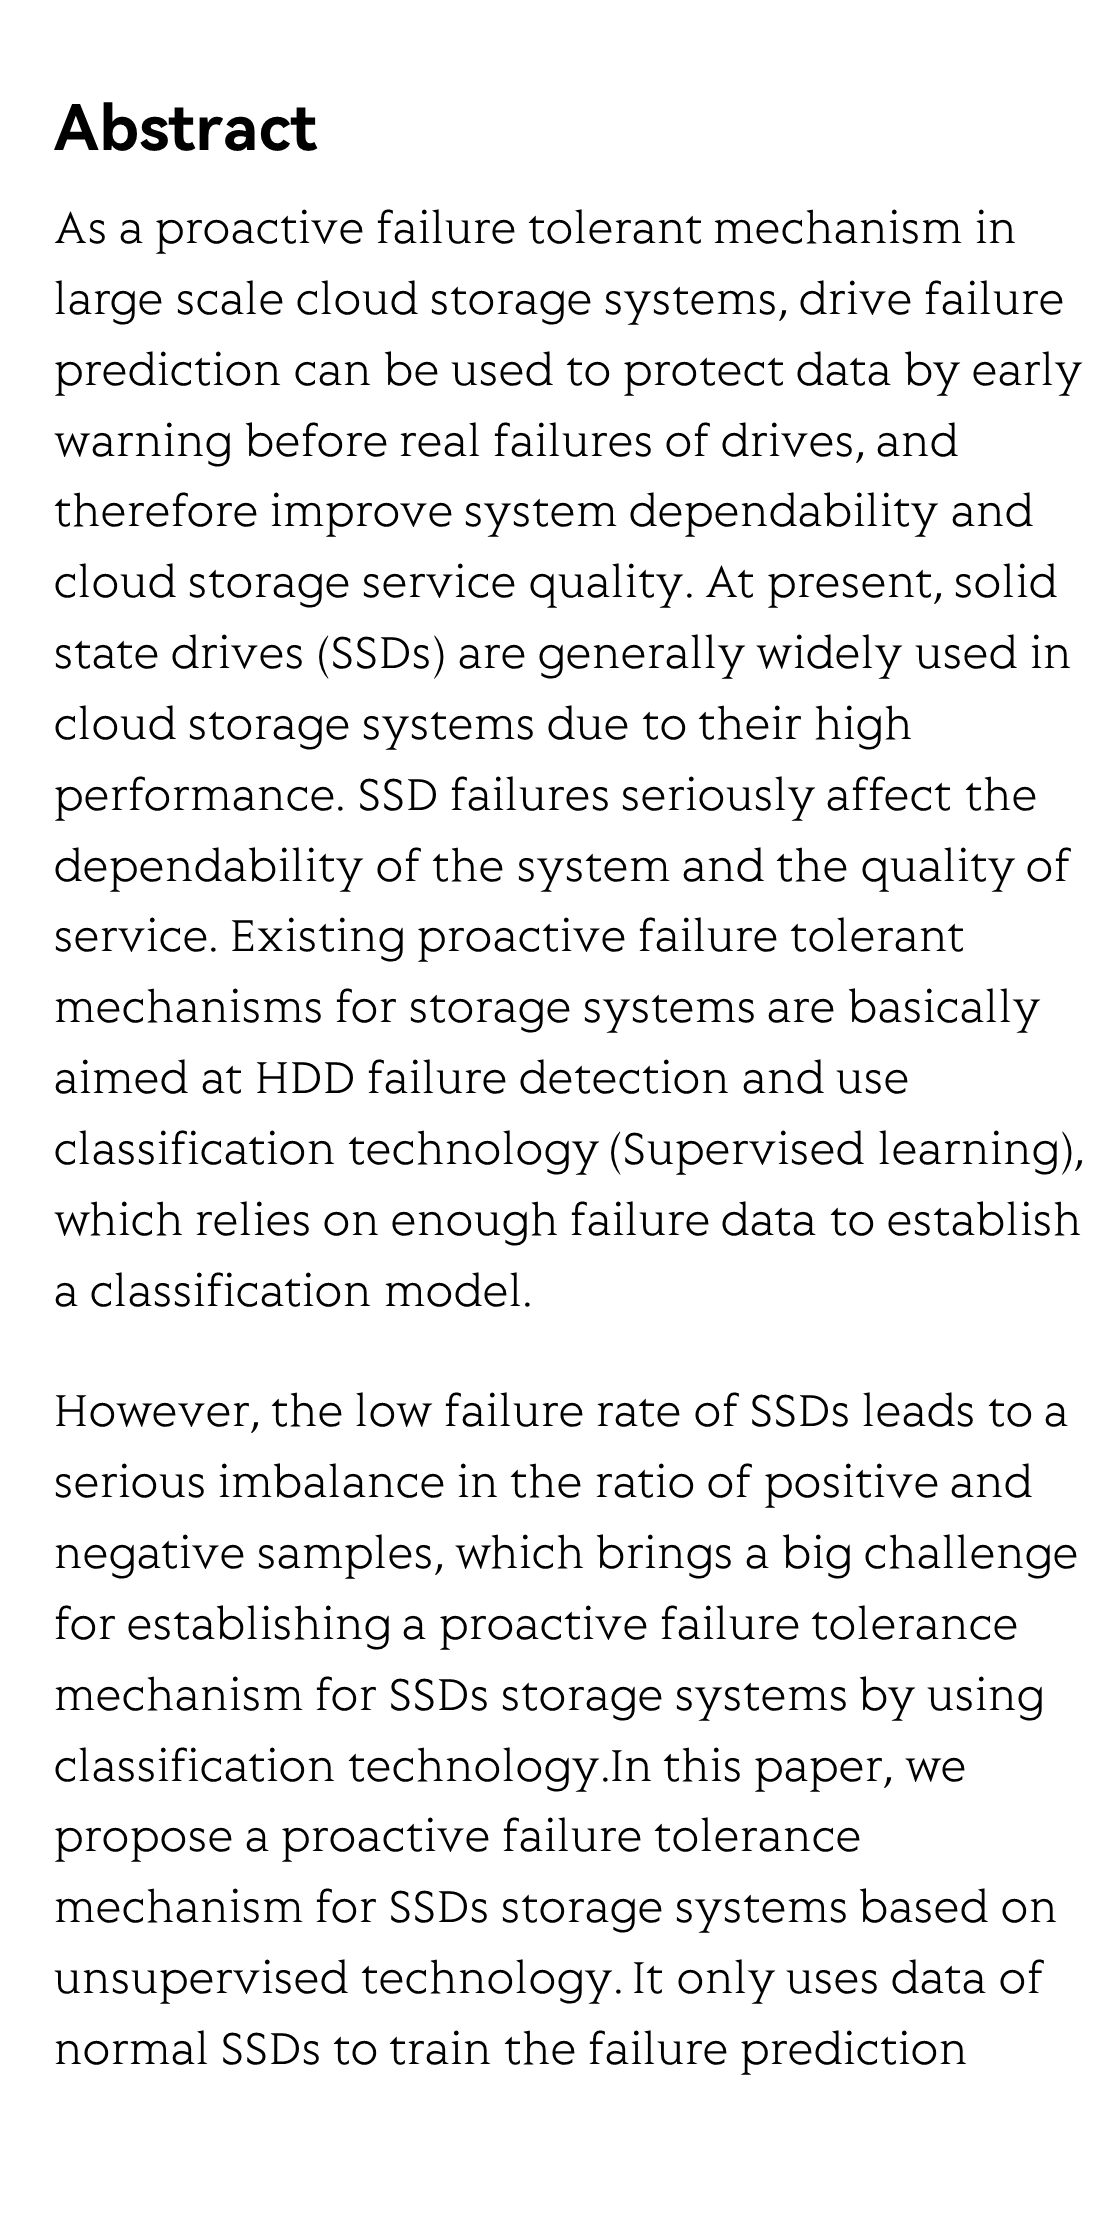 A Proactive Failure Tolerant Mechanism for SSDs Storage Systems based on Unsupervised Learning_2